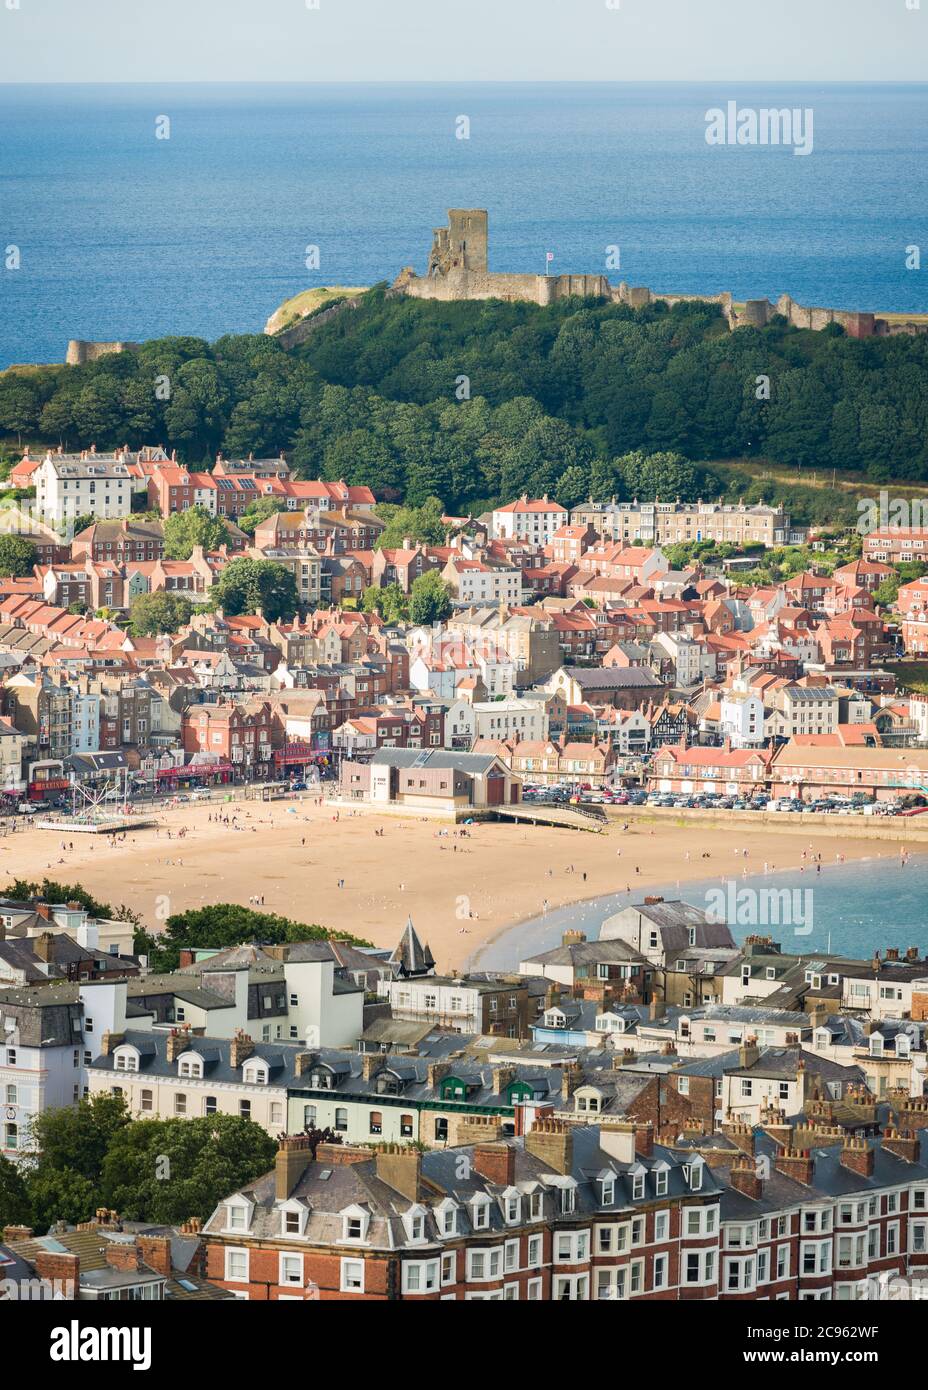 Summer day in Scarborough, Yorkshire, UK Stock Photo